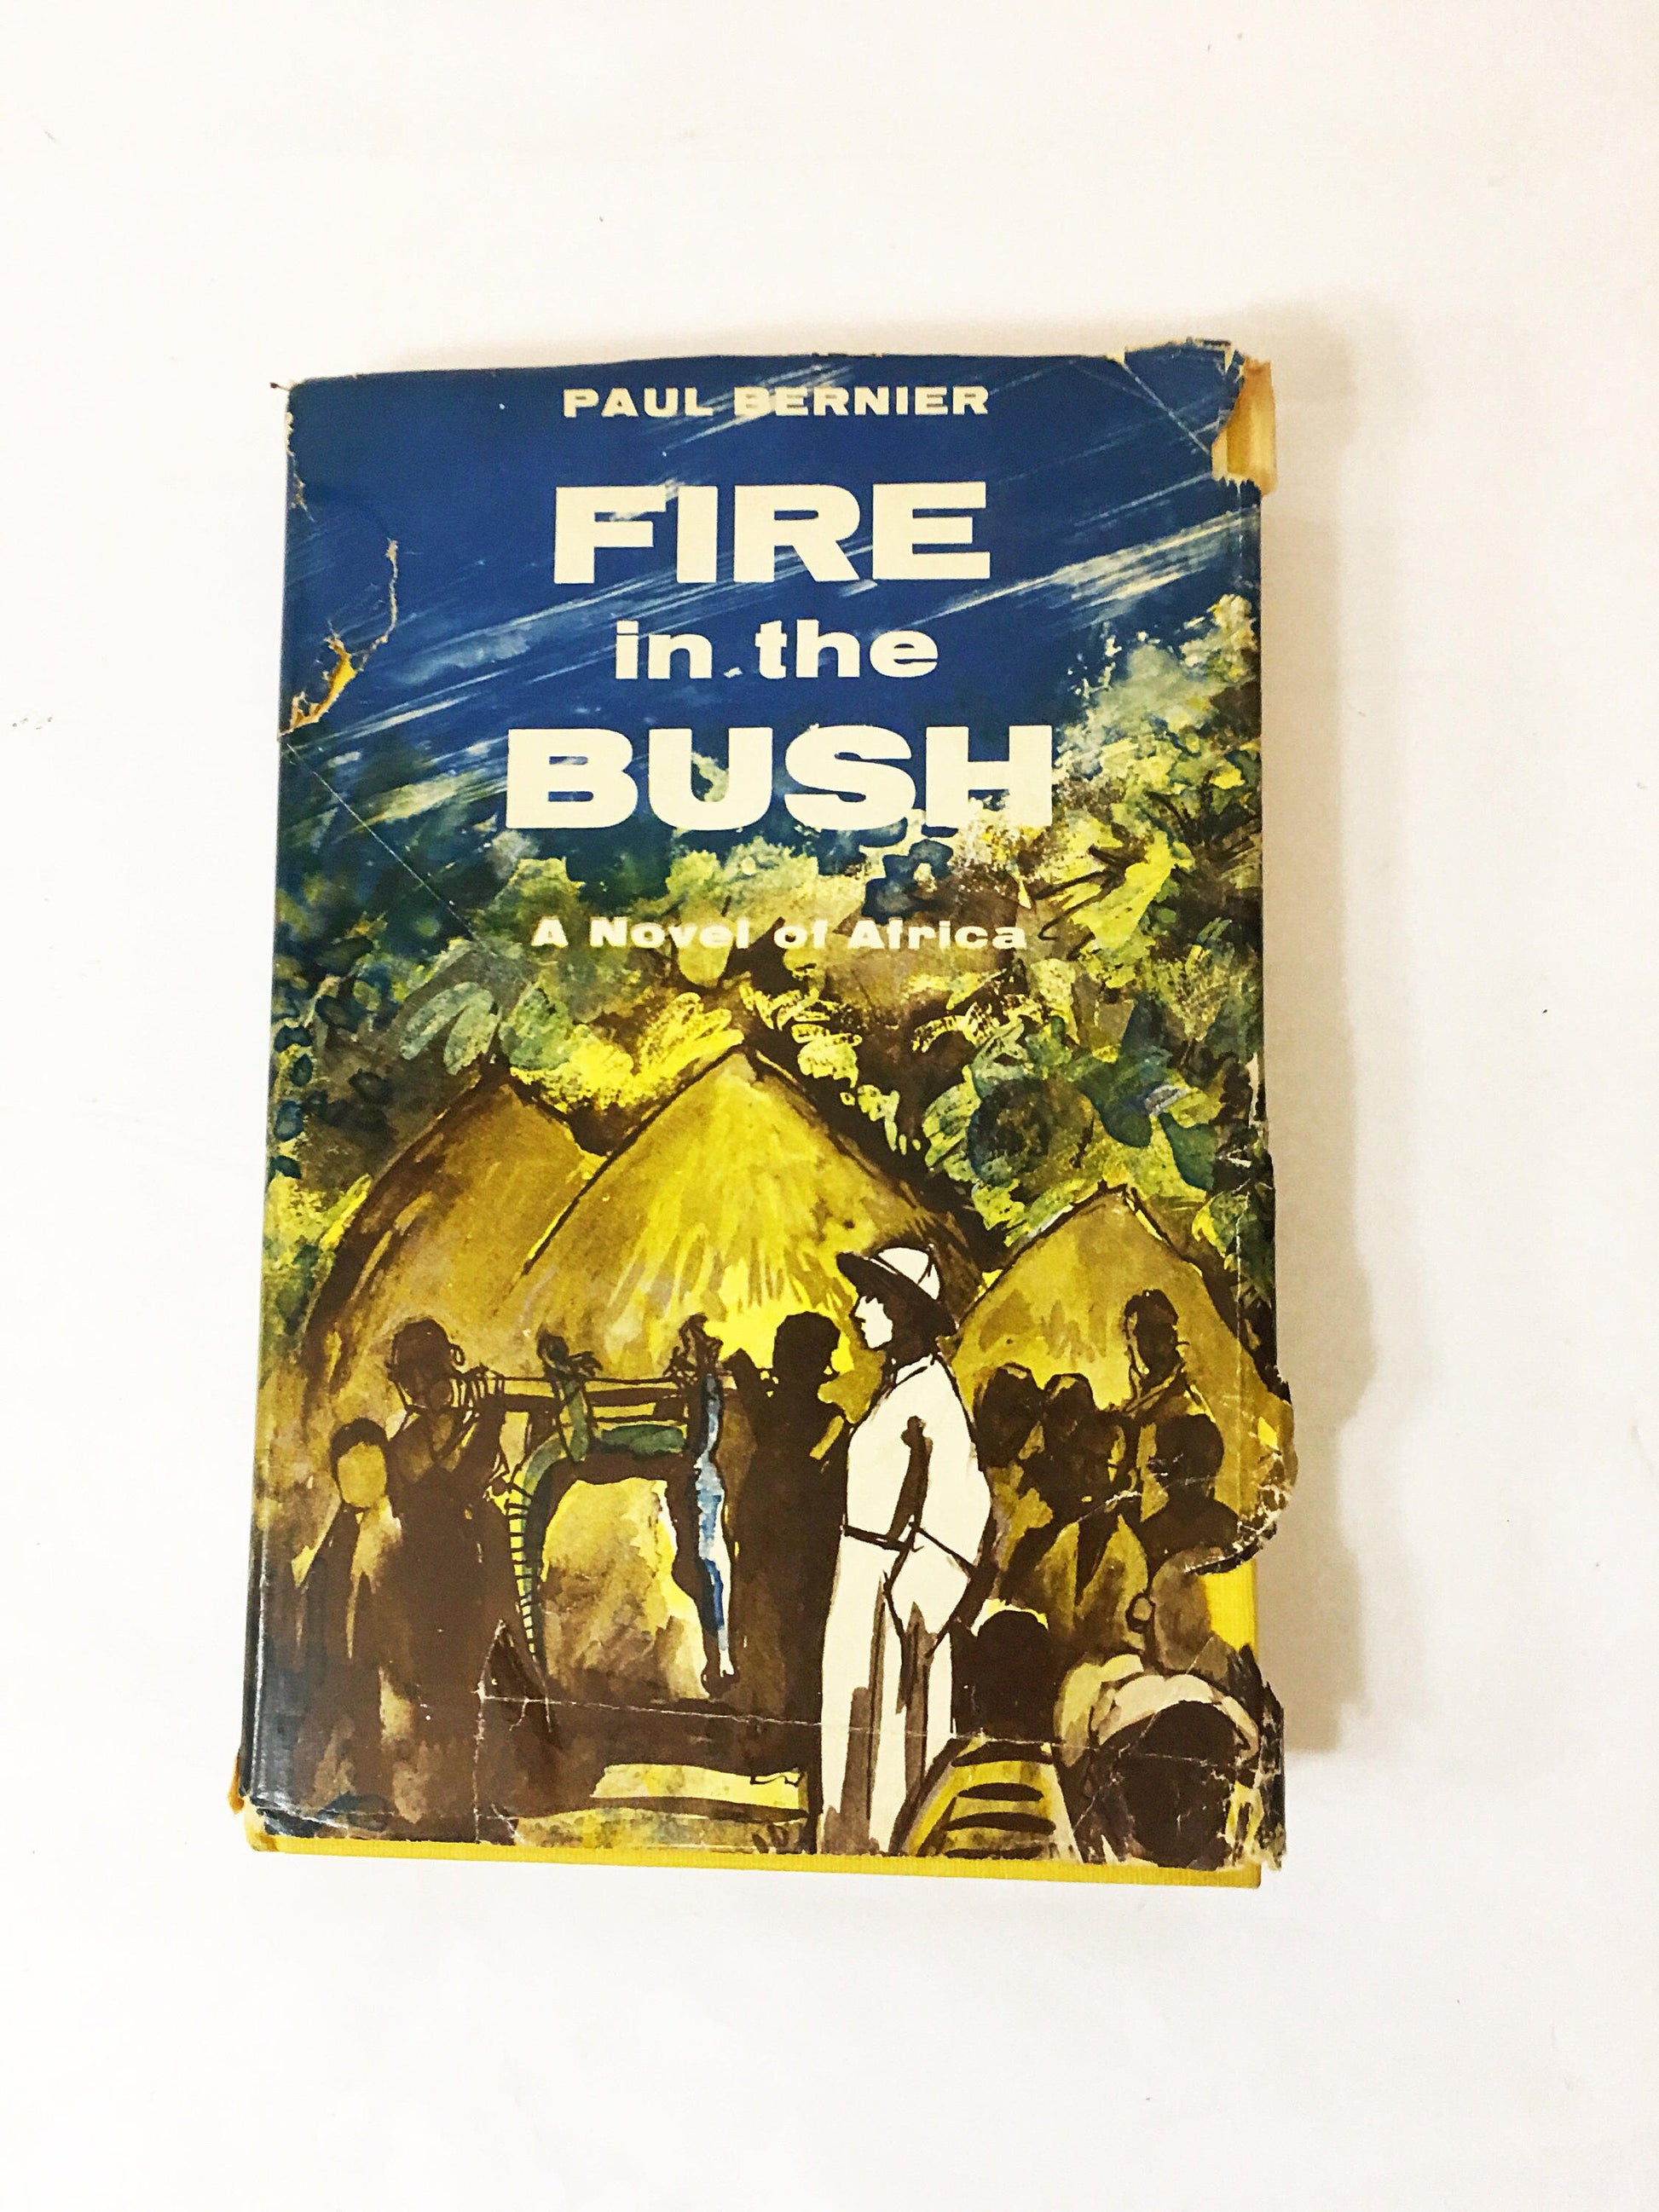 Fire in the Bush FIRST EDITION vintage book of Africa by Paul Bernier. Dust jacket P. J. Kenedy 1957. Roch Le Page. Vintage book. Gift